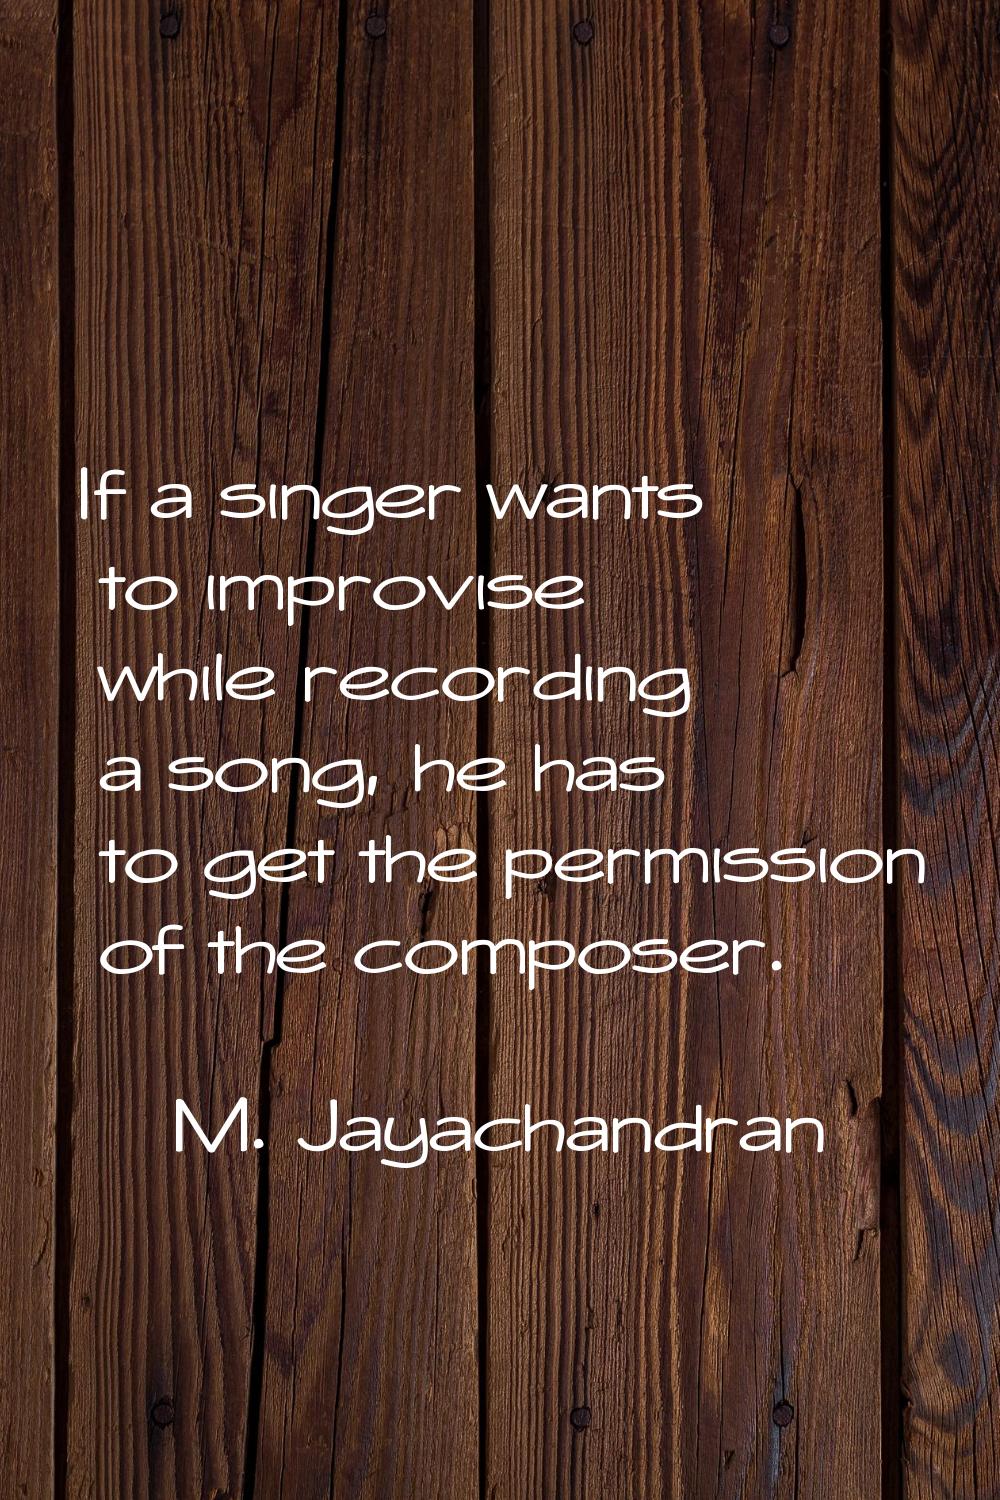 If a singer wants to improvise while recording a song, he has to get the permission of the composer